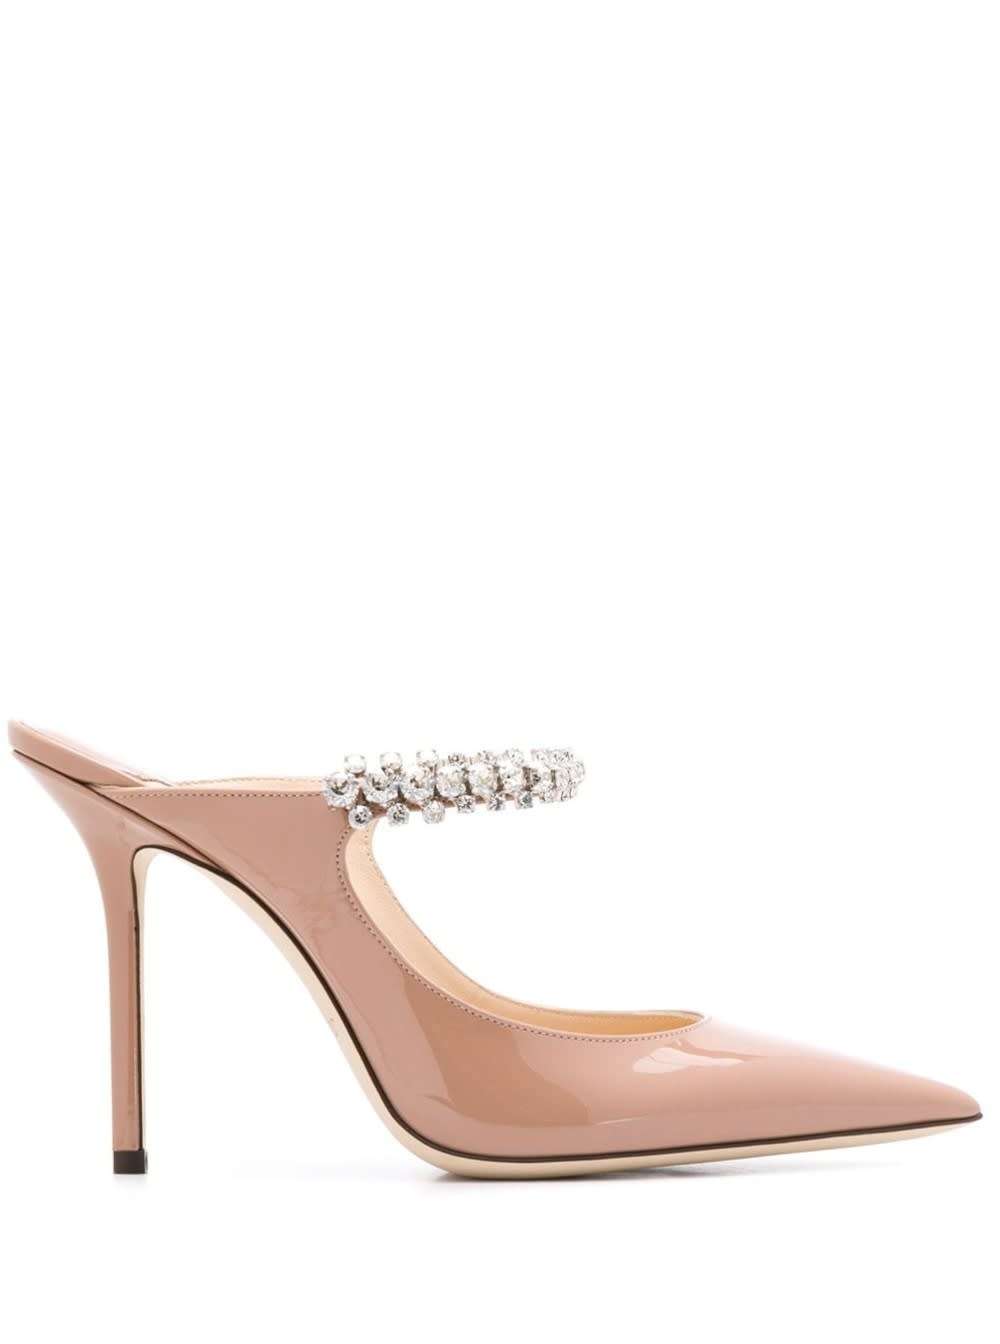 Shop Jimmy Choo Womans Pink Patent Leather Pumps With Crystal Strap Detail In Ballet Pink